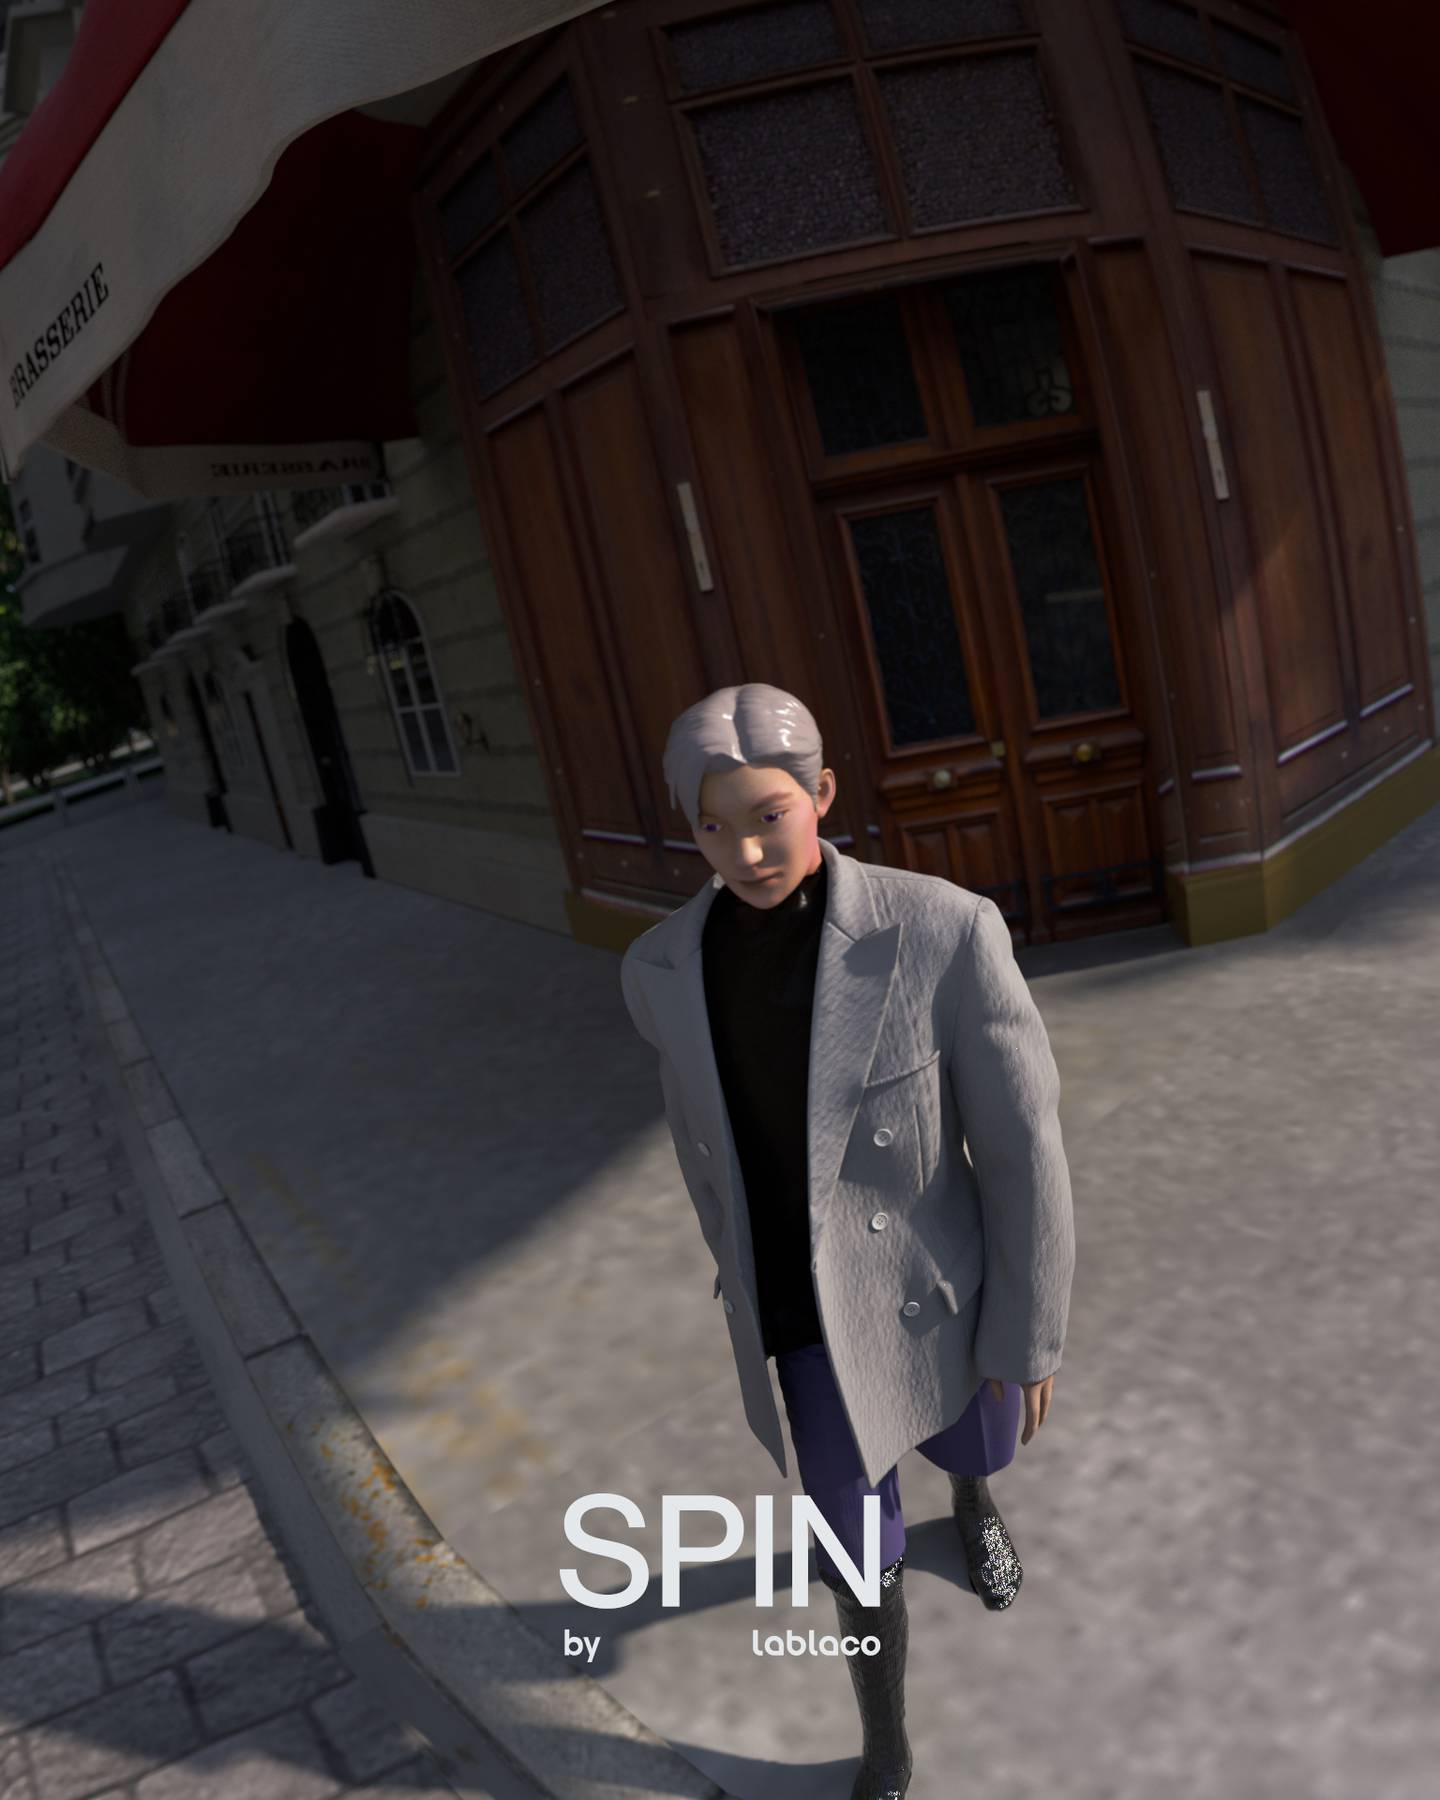 An avatar in a virtual world stands at a street corner in a grey double-breasted coat.